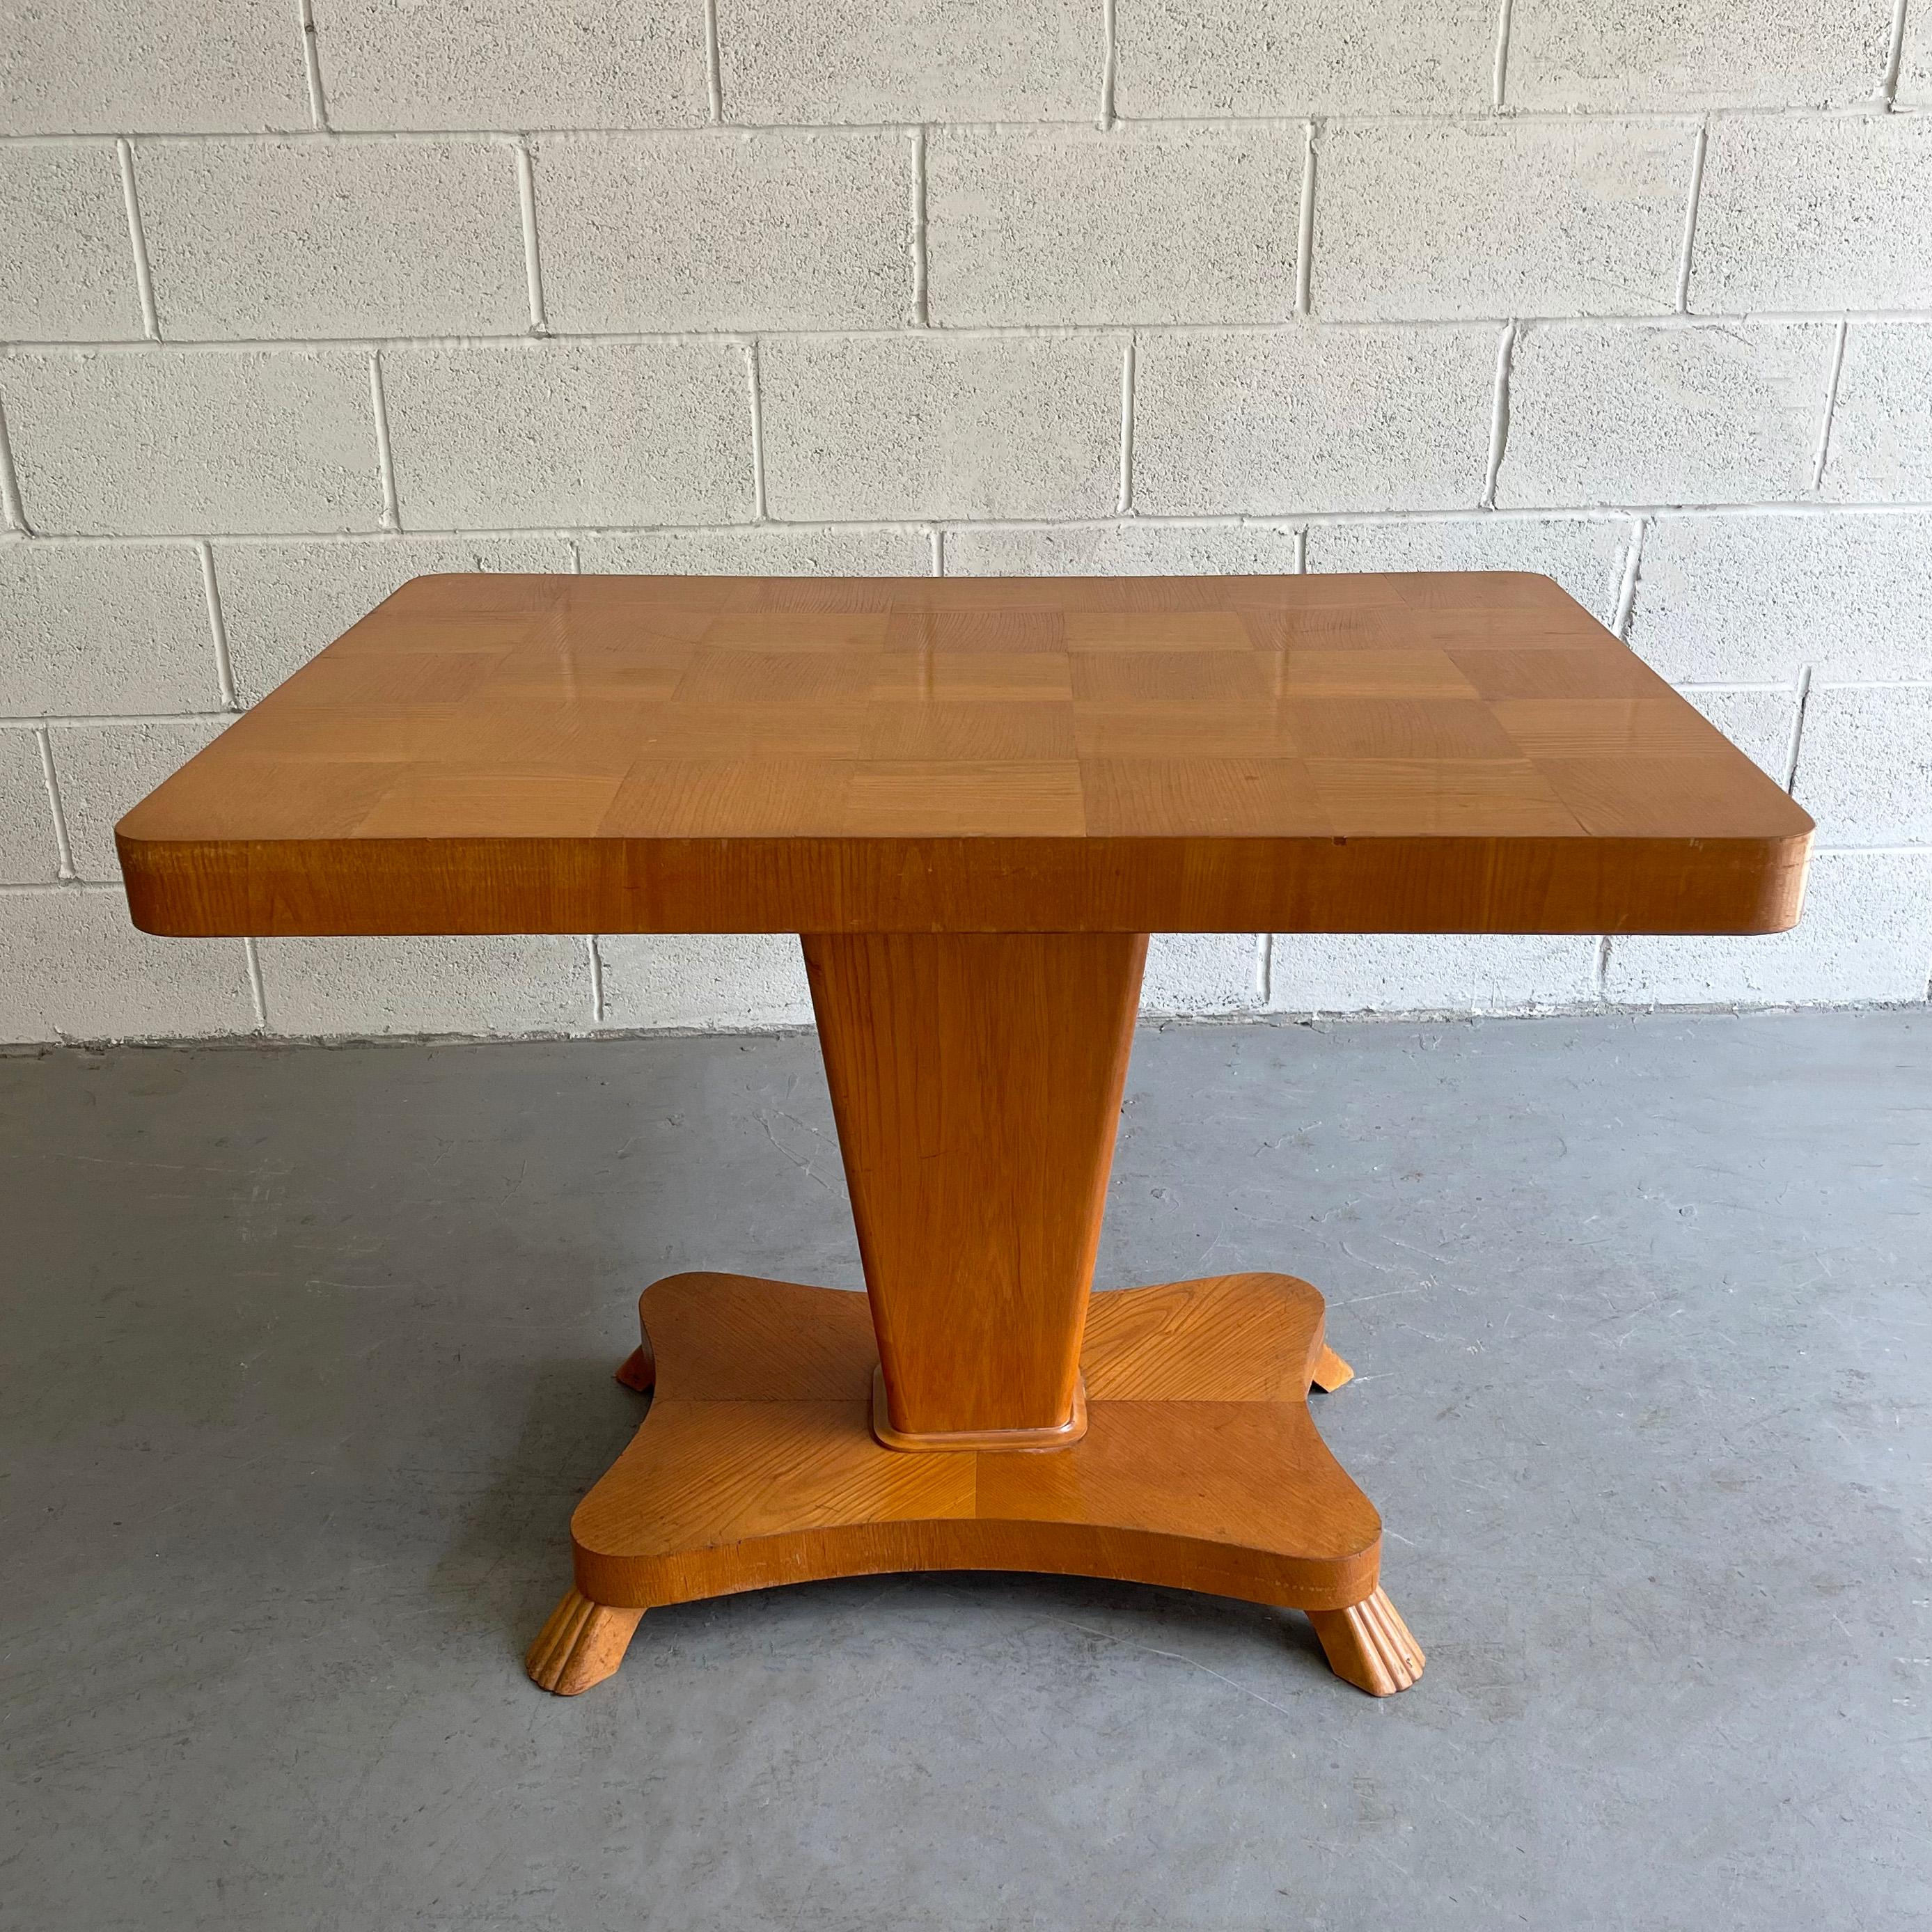 Midcentury, Biedermeier style, satinwood game table features a nicely detailed pedestal base and checkerboard parquet top with swivel height adjustment from 24- 27.50 inches.